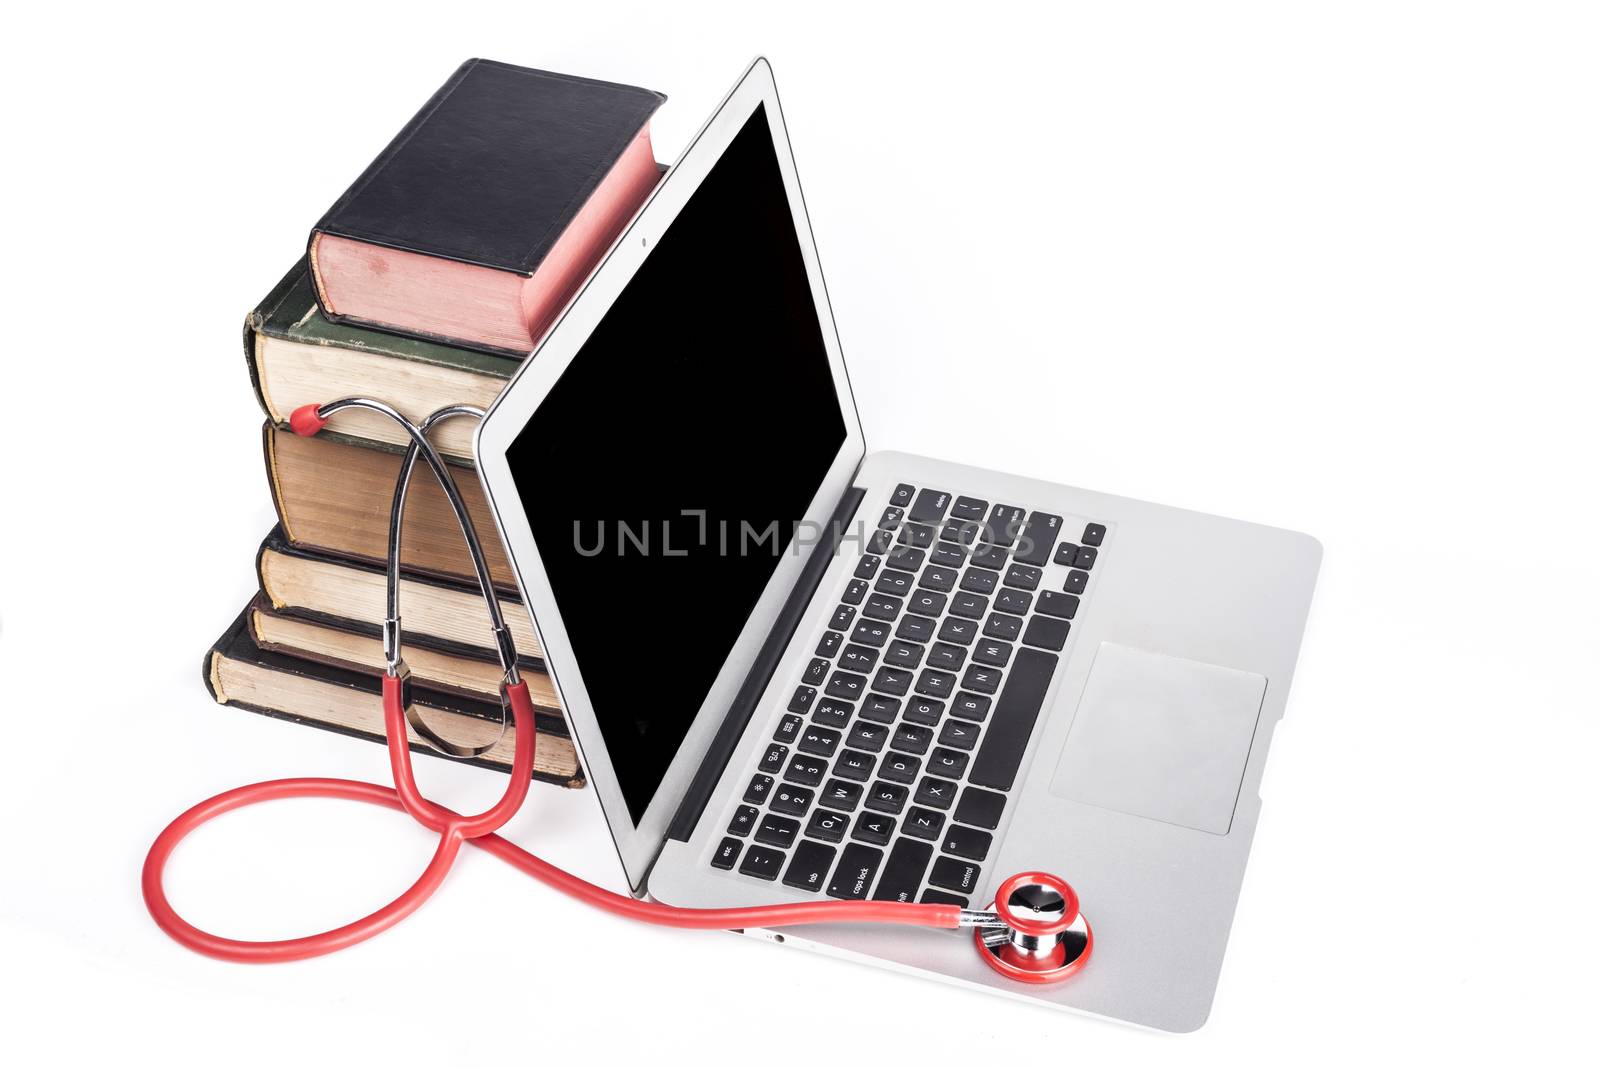 Silver laptop with red stethoscope and old books pile isolated on white background